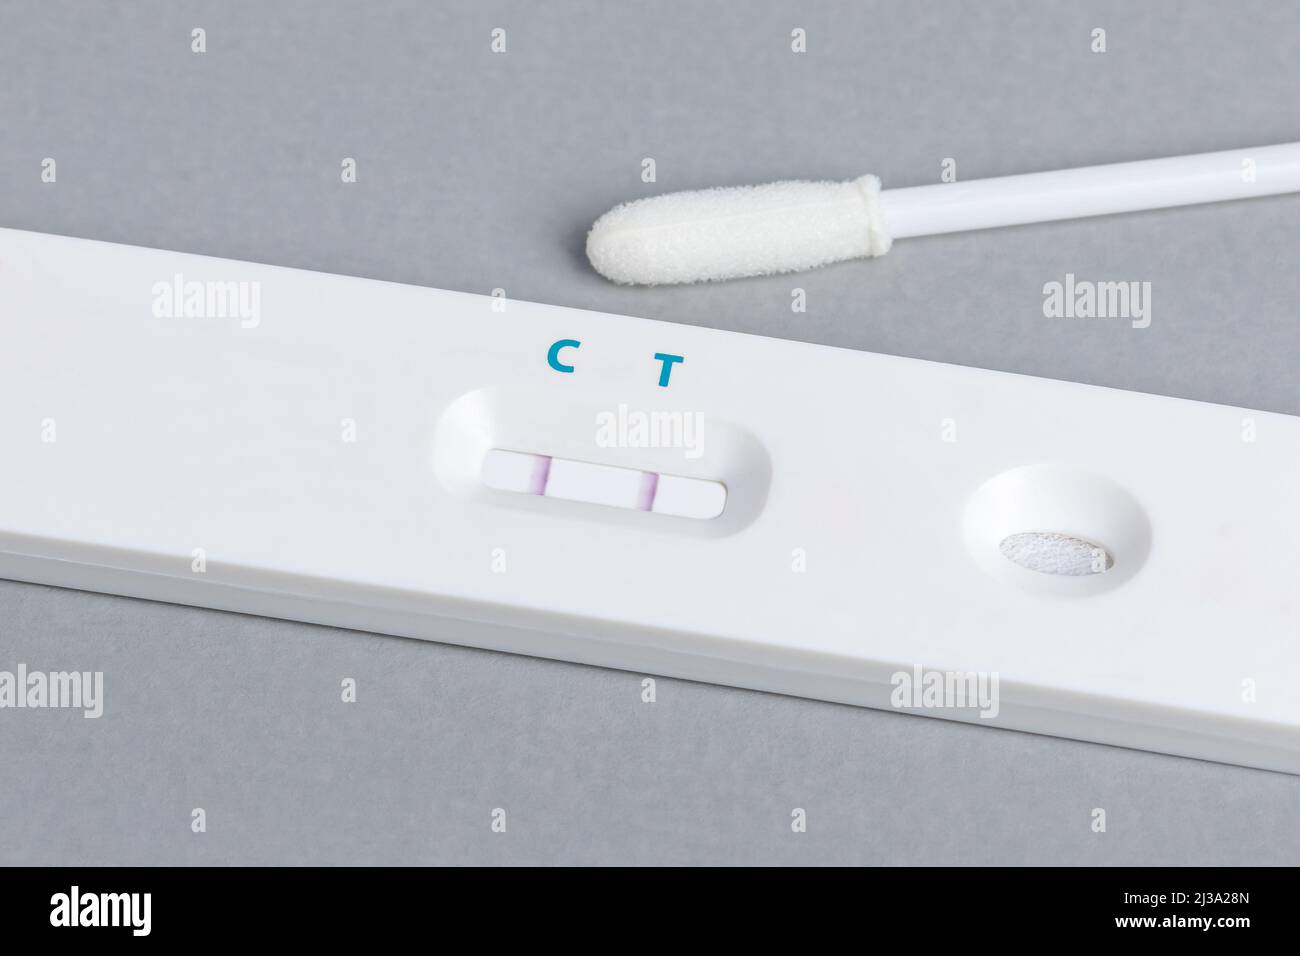 Covid-19 rapid test kit with positive result. Coronavirus home testing, pandemic and healthcare concept. Stock Photo